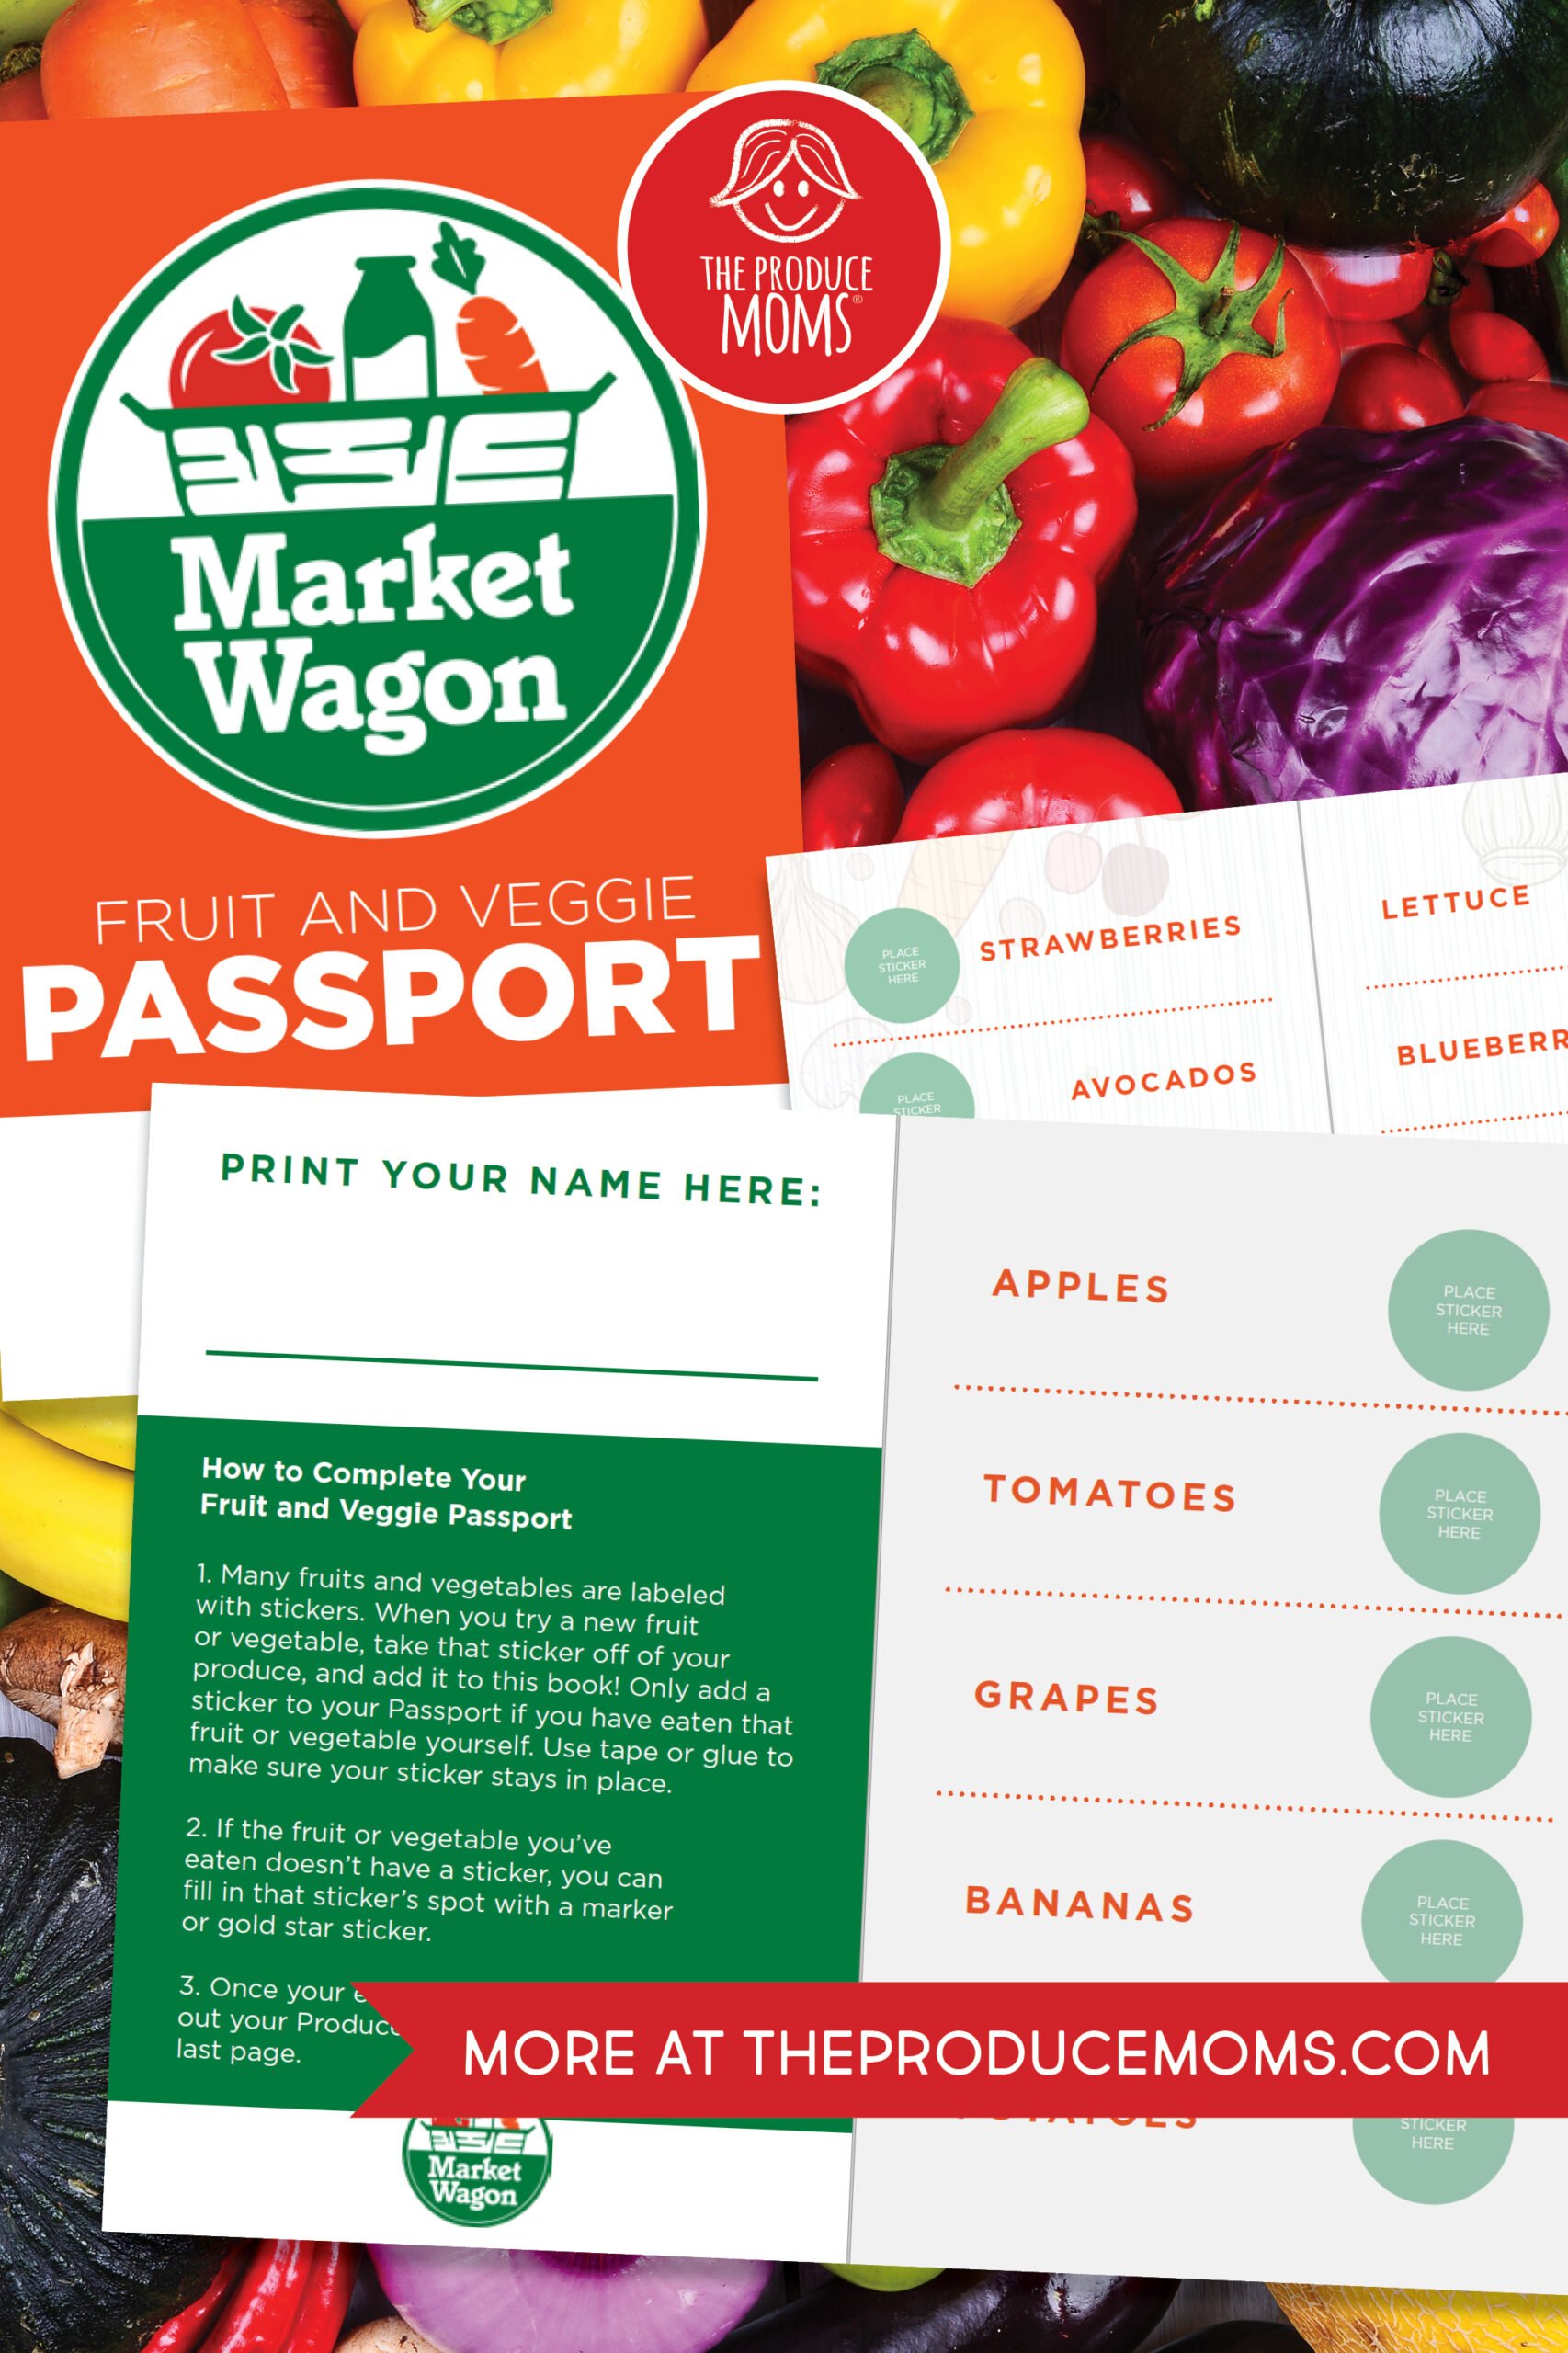 Fruit and Veggie Passport: Your Ticket to a Produce Adventure